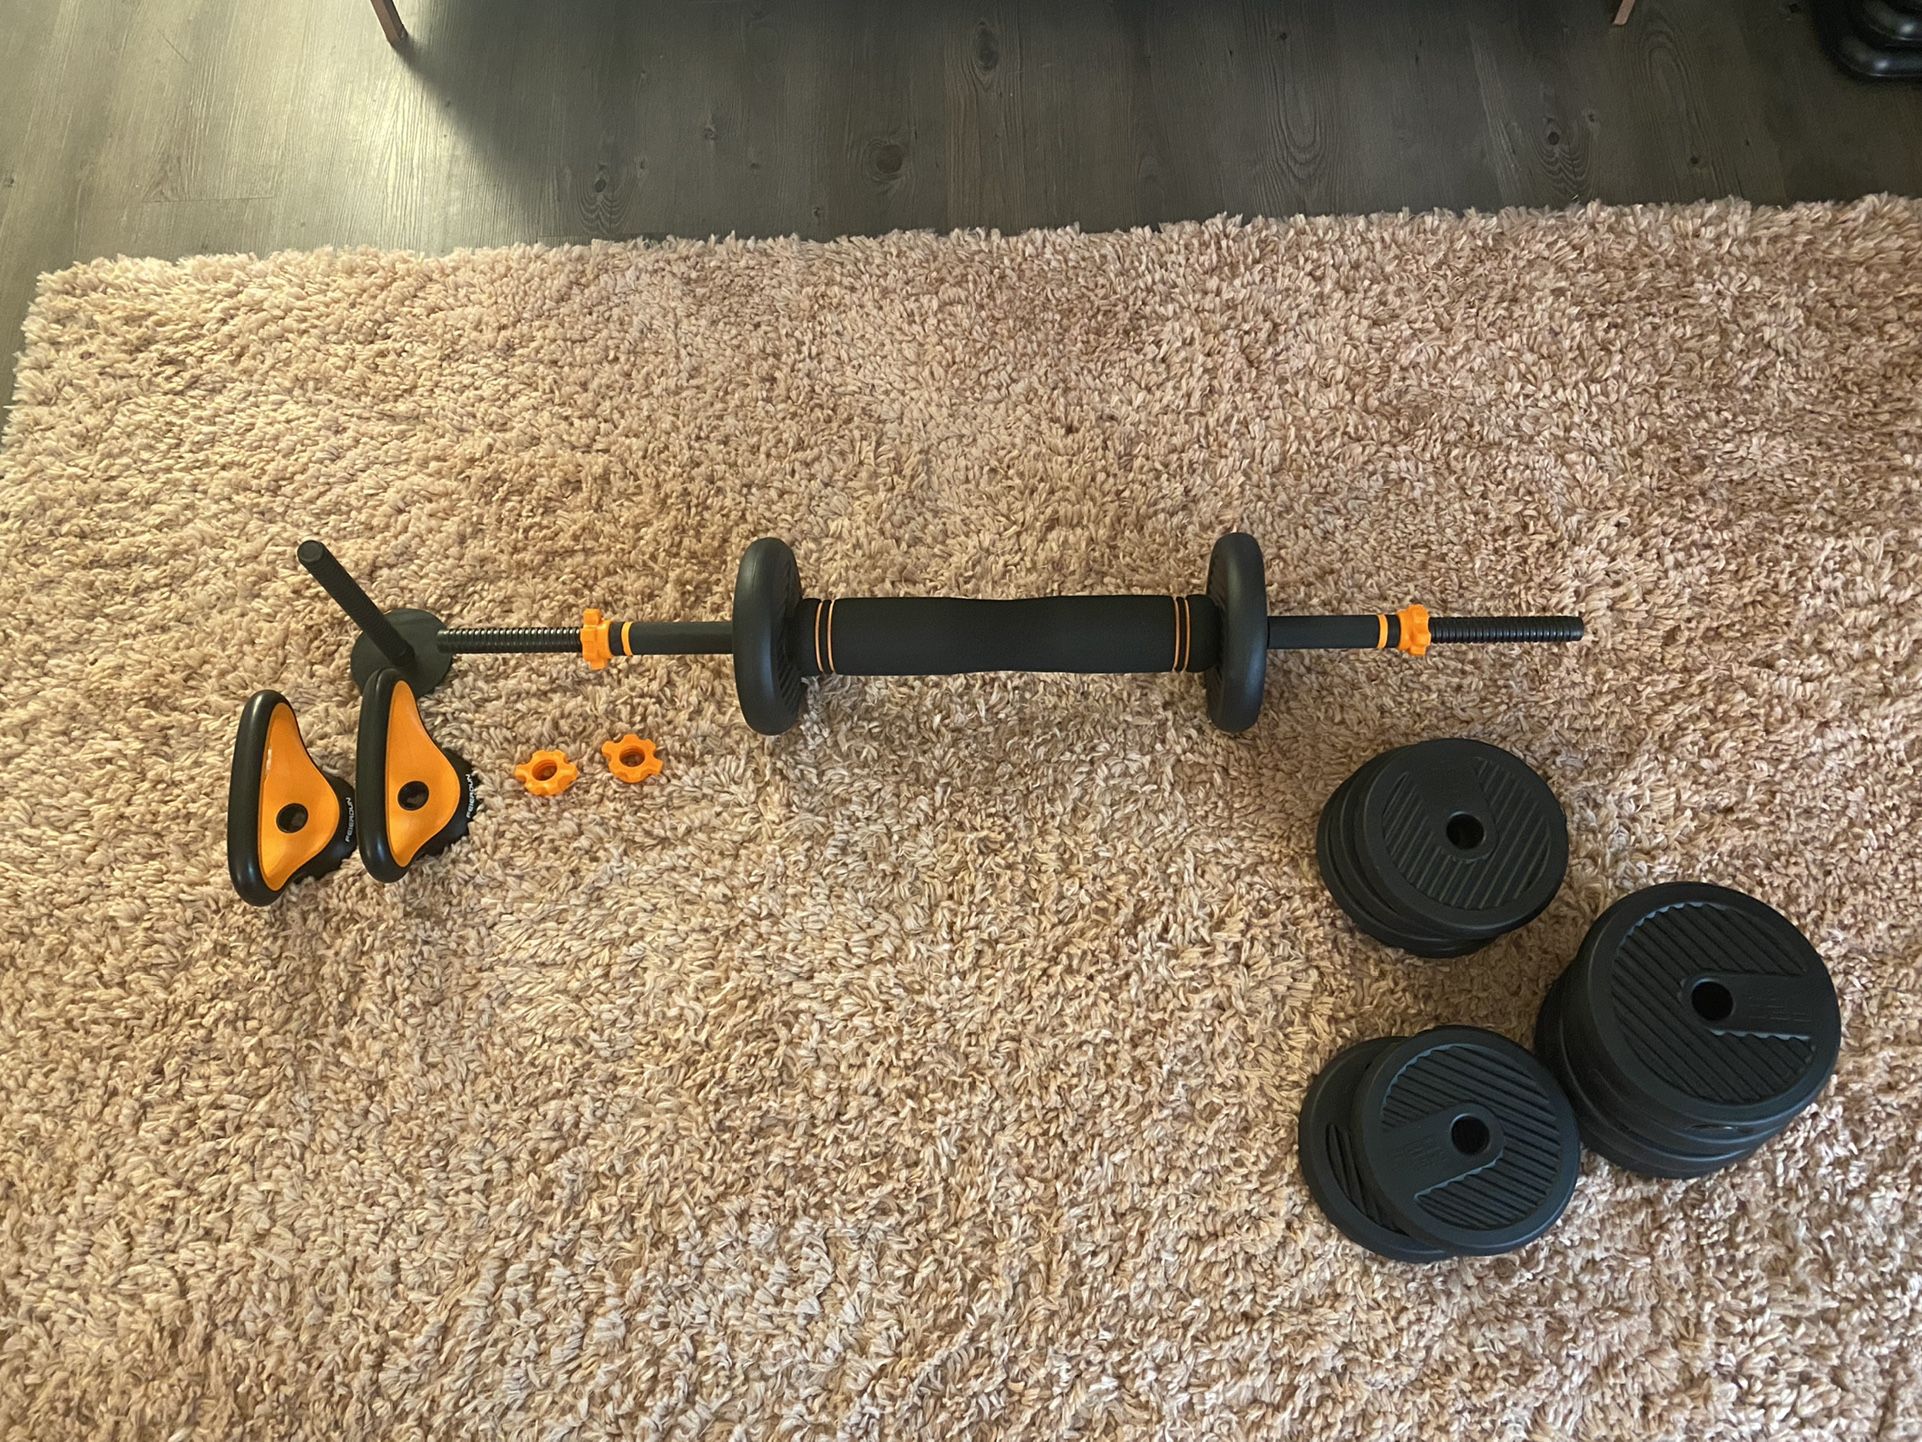 6-in-1 Adjustable Dumbbell Weight Set